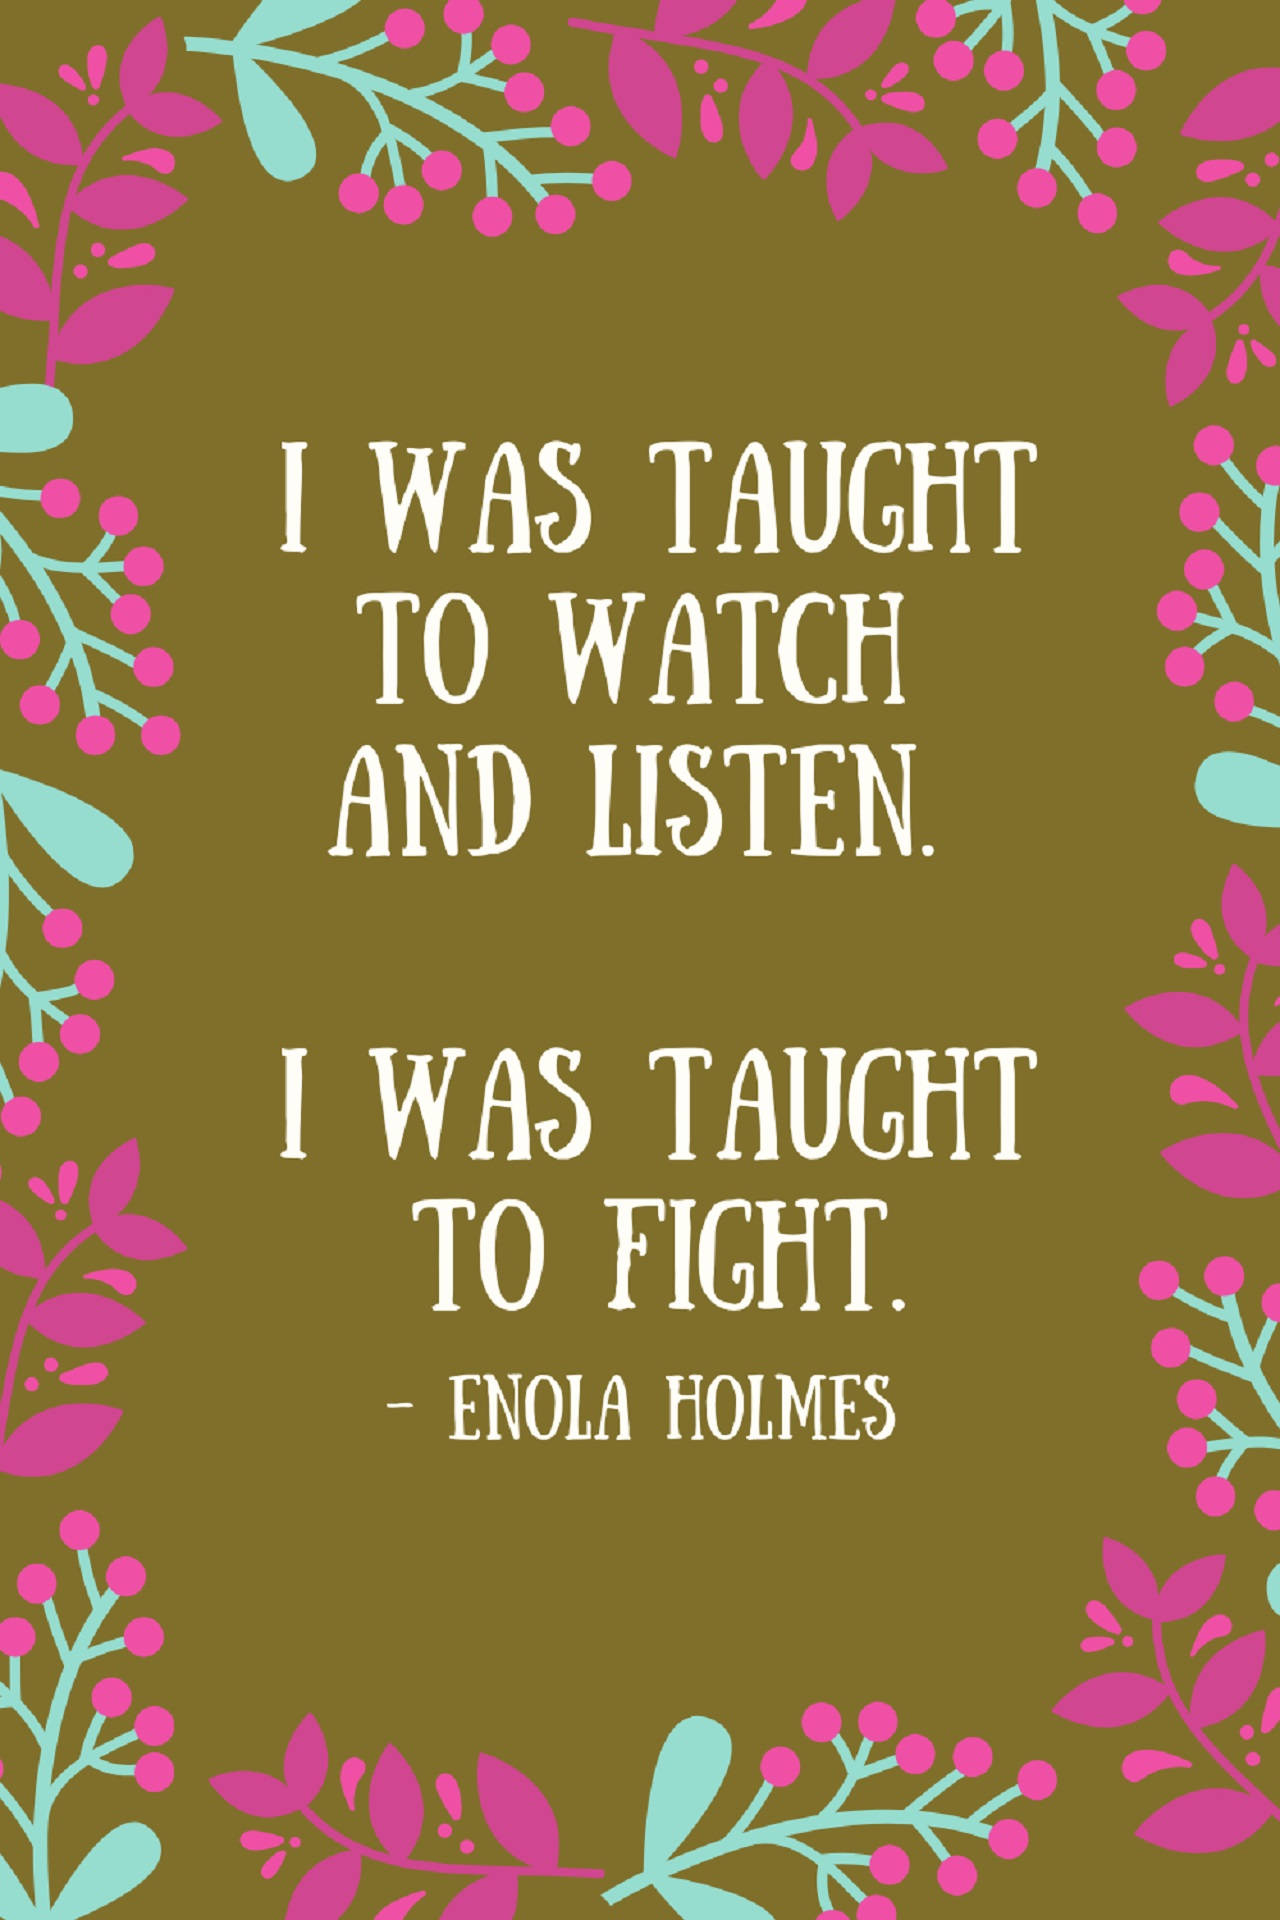 Enola Holmes Taught To Fight Quote Wallpaper